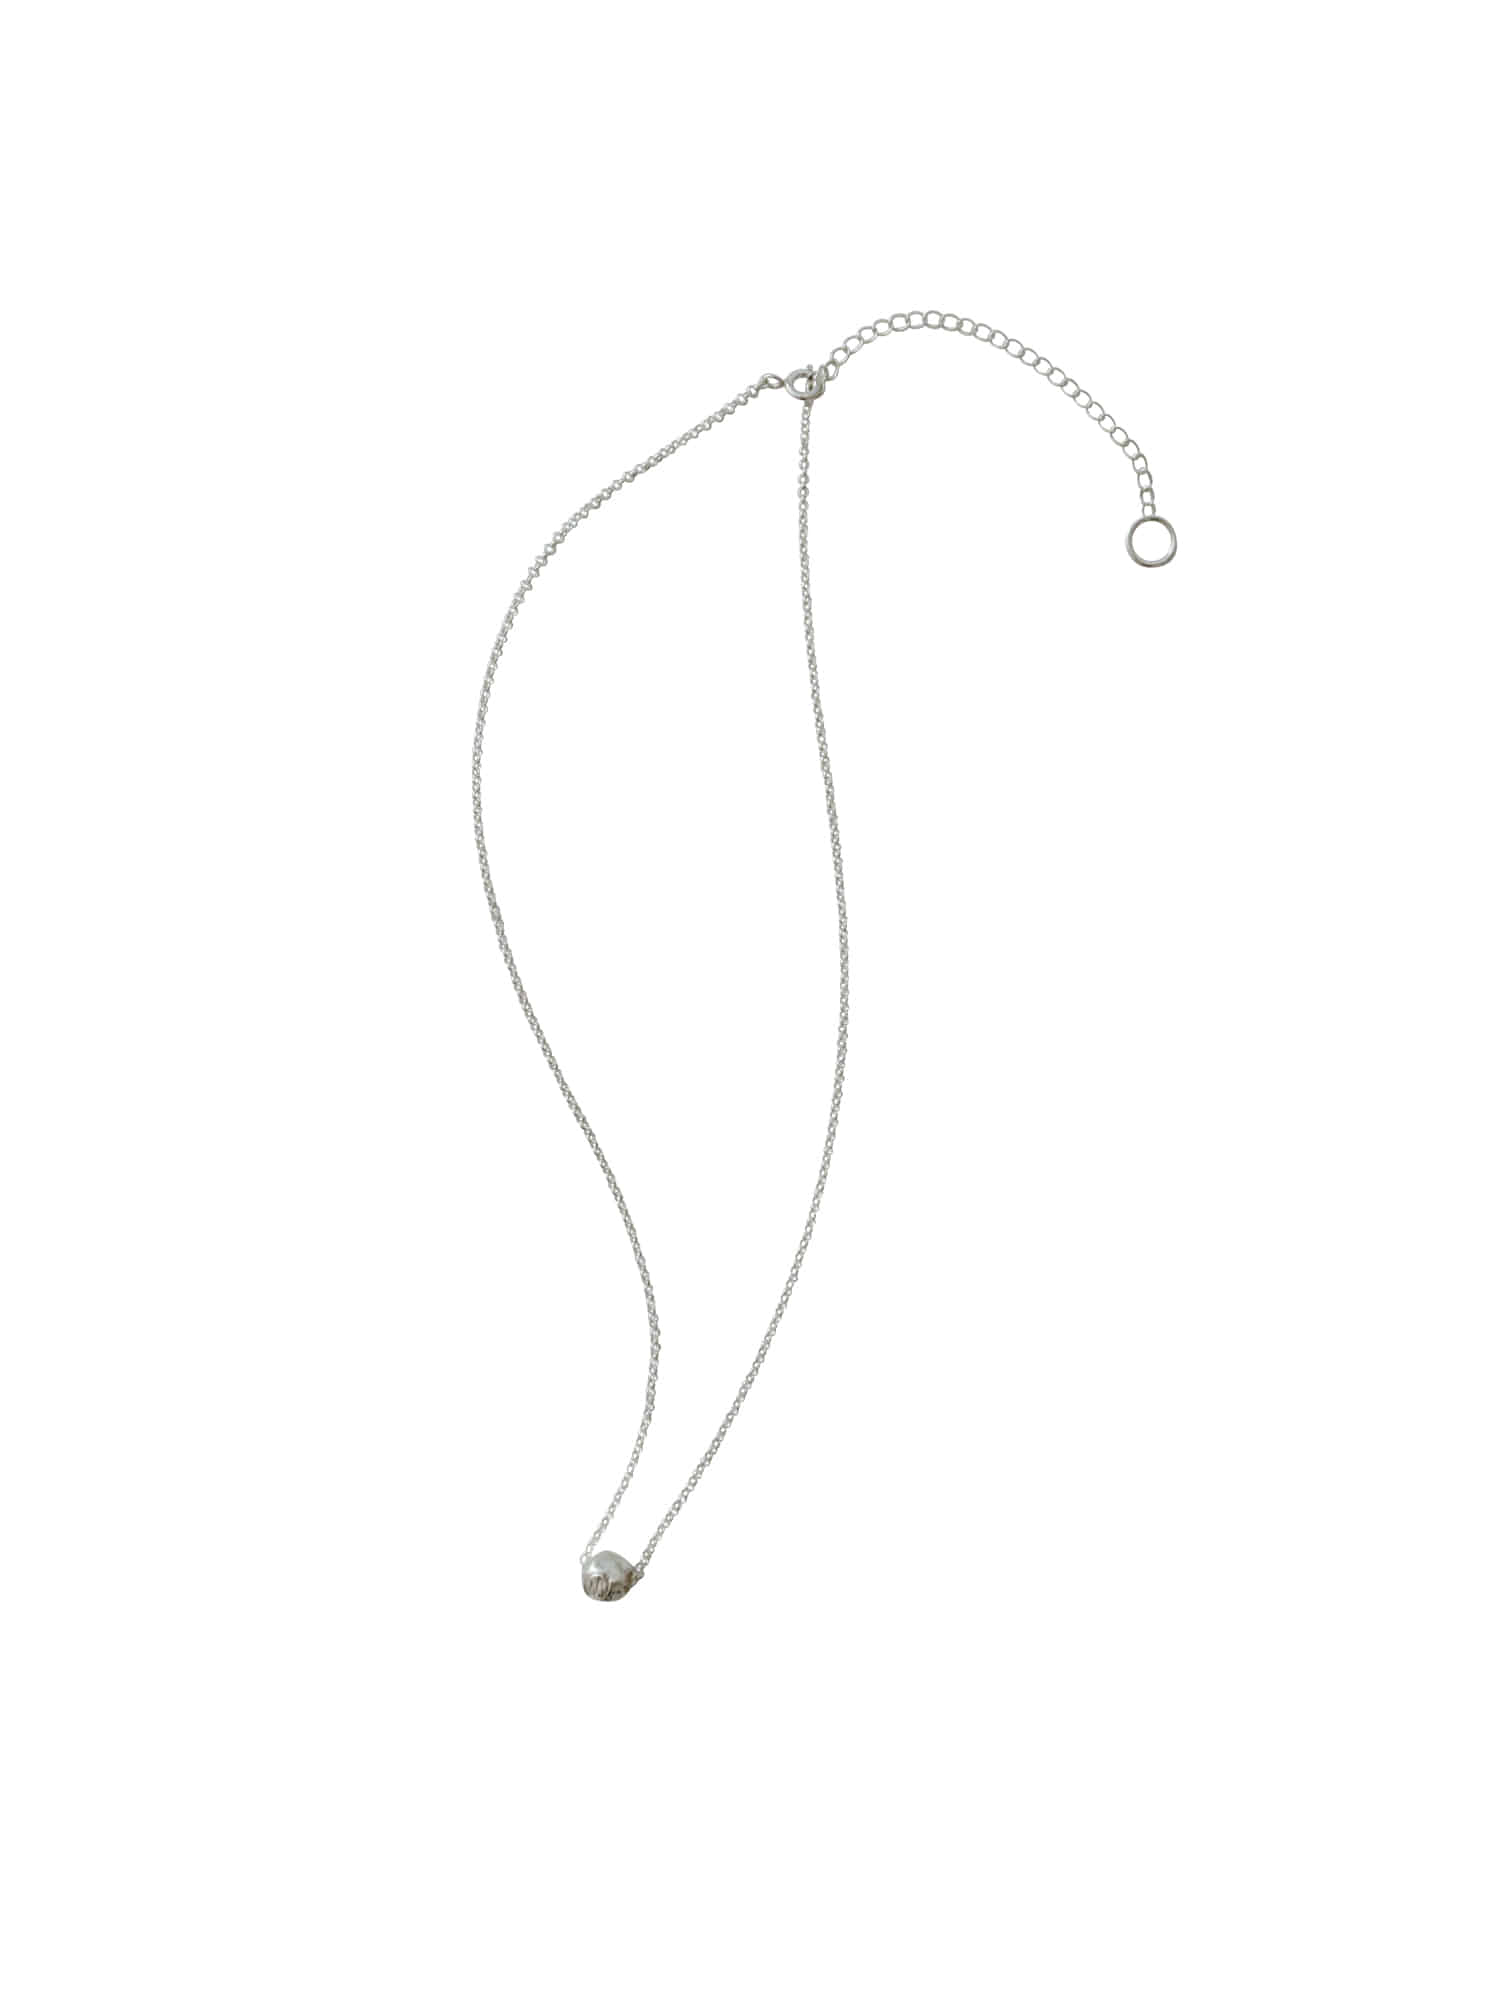 Bale Necklace - Silver